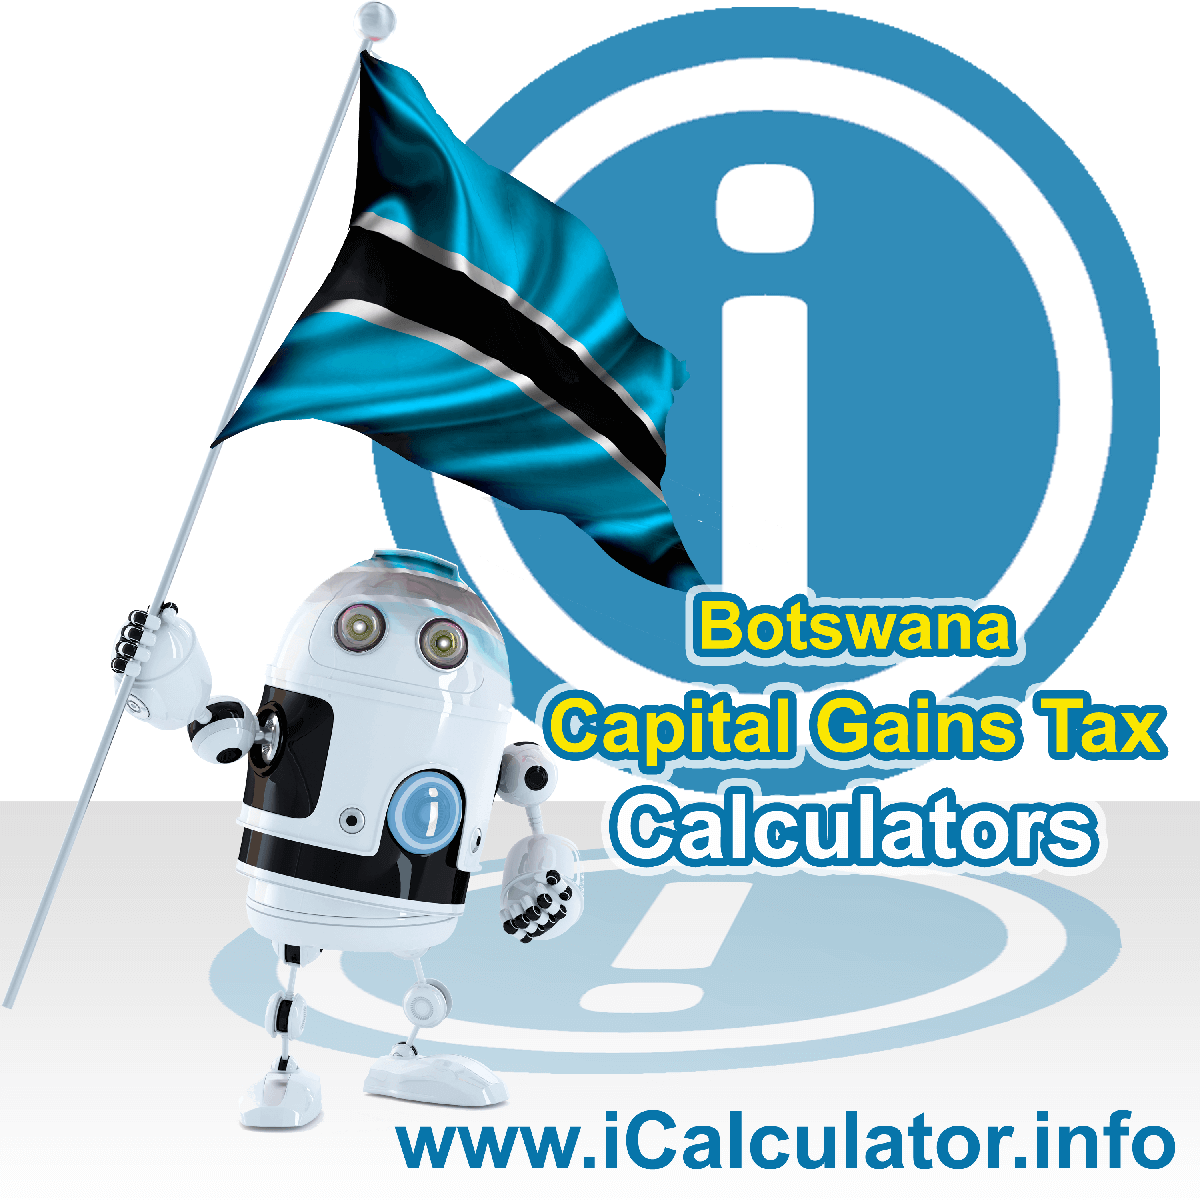 Botswana CGT Calculator. This image shows the Botswana flag and information relating to the capital gains tax formula used for calculating capital gains Tax in Botswana using the Botswana CGT Calculator in 2023